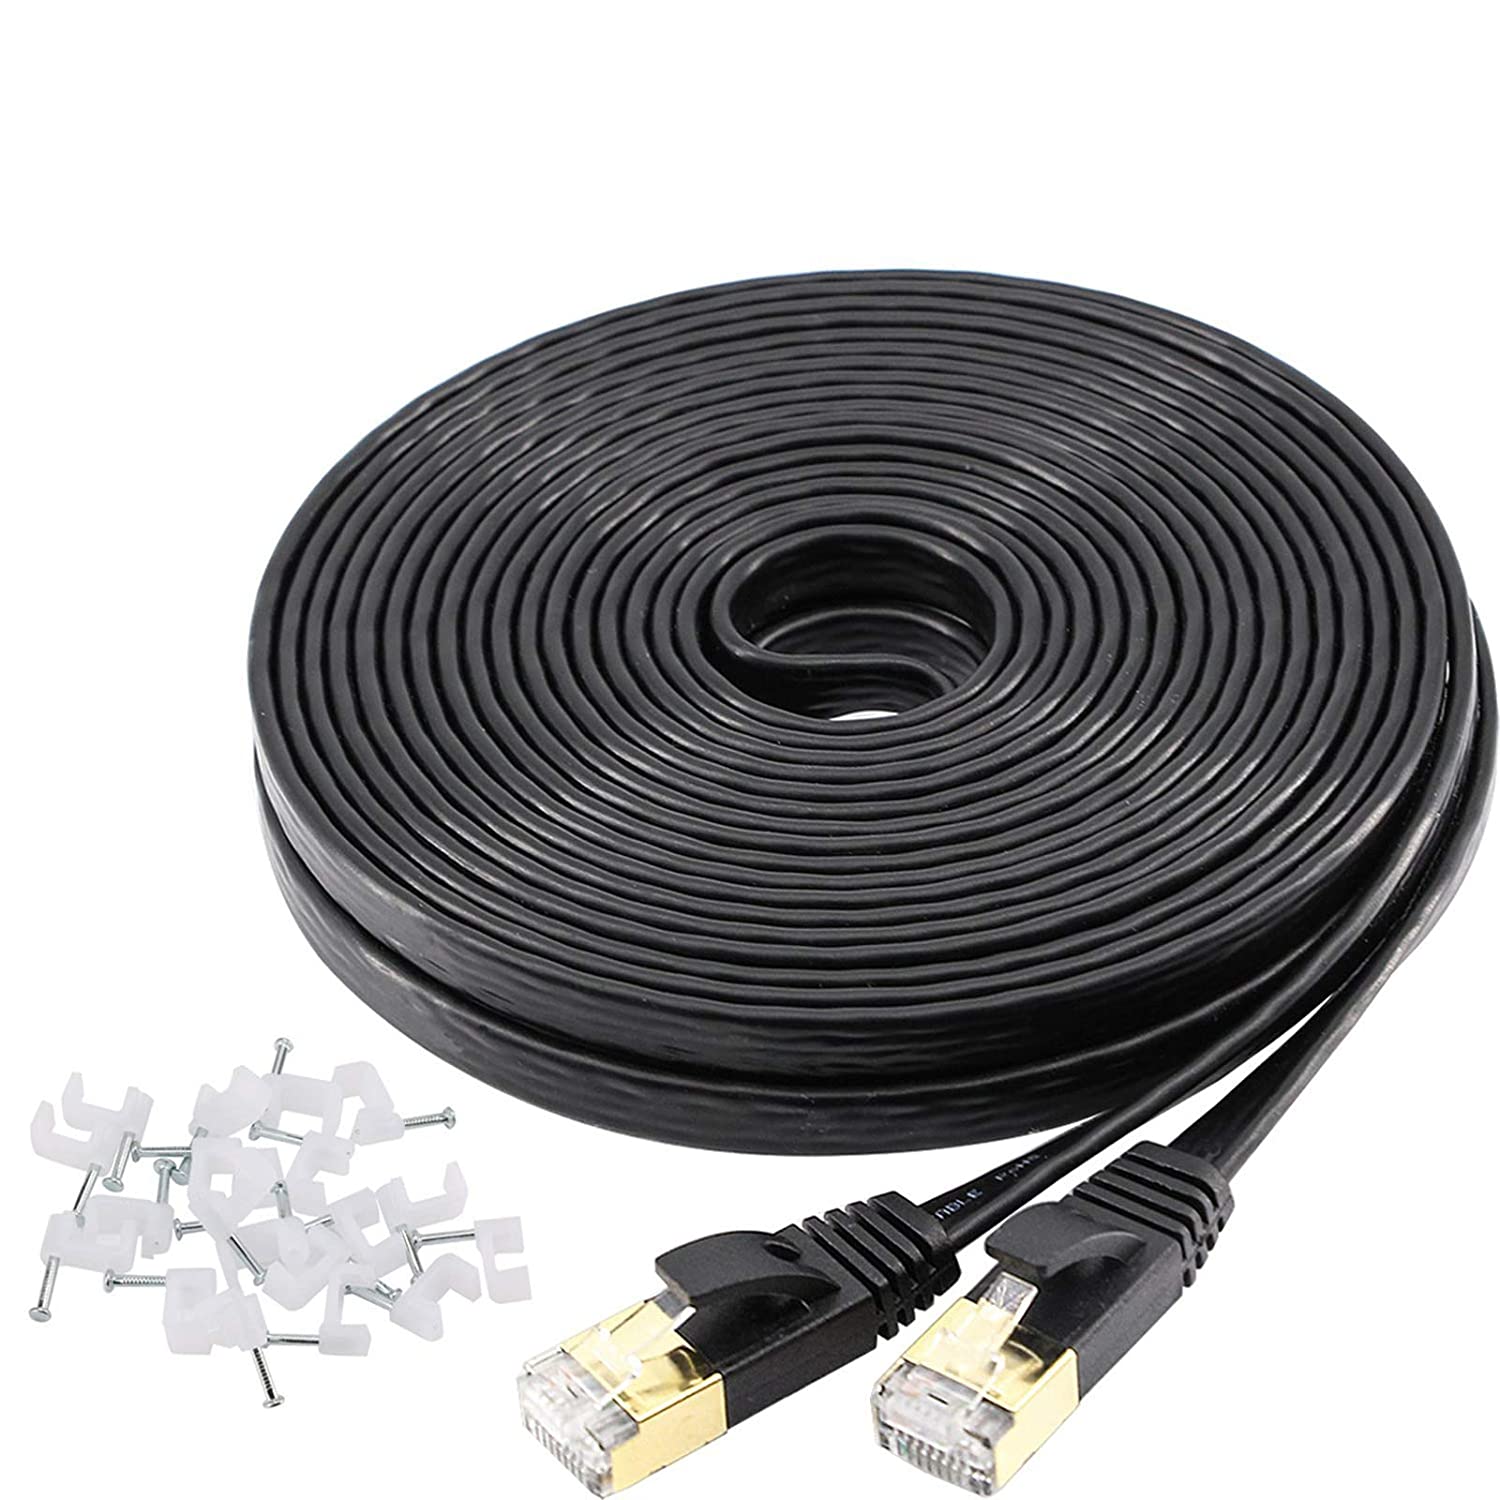 Best Ethernet cables for PS4 in 2022